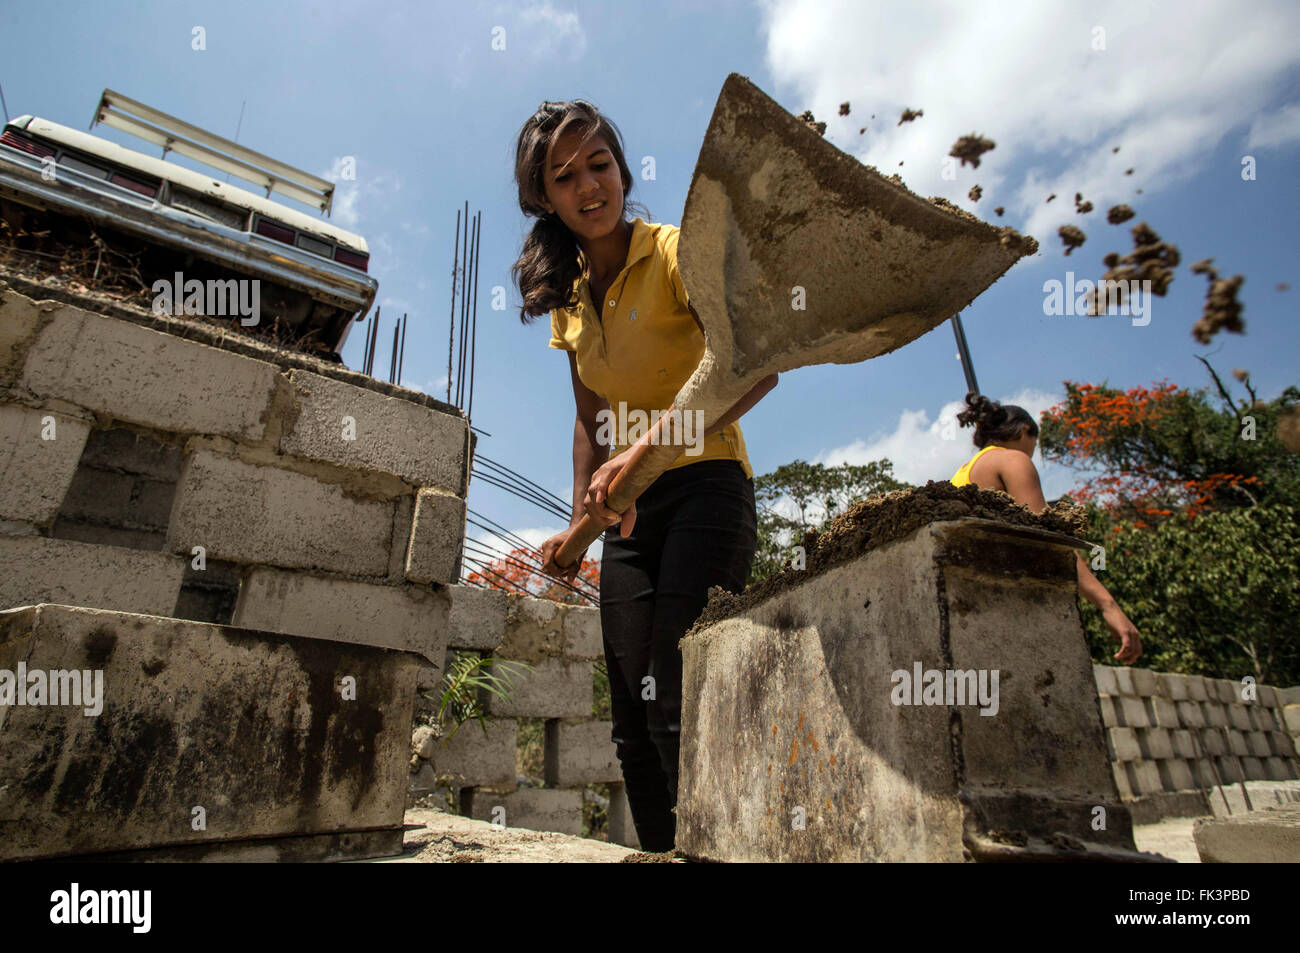 (160307) -- MIRANDA, March 7, 2016 (Xinhua) -- Image taken on March 4, 2016 shows Franyelis Sauce of 16 years old working in the cooperative 'Women on the Cement' in the neighborhood of Petare, capital of the municipality of Sucre, Miranda state, Venezuela. The cooperative 'Women on the Cement' was initiated in 2010 by Coromoto Rengifo, a retired educator, and his two daughters, Kheinin and Kheilin. This group of eight women produces up to 150 blocks of cement daily. The International Women's Day is celebrated annually on March 8. The theme for 2016 is 'Planet 50-50 by 2030: Step It Up for Gen Stock Photo